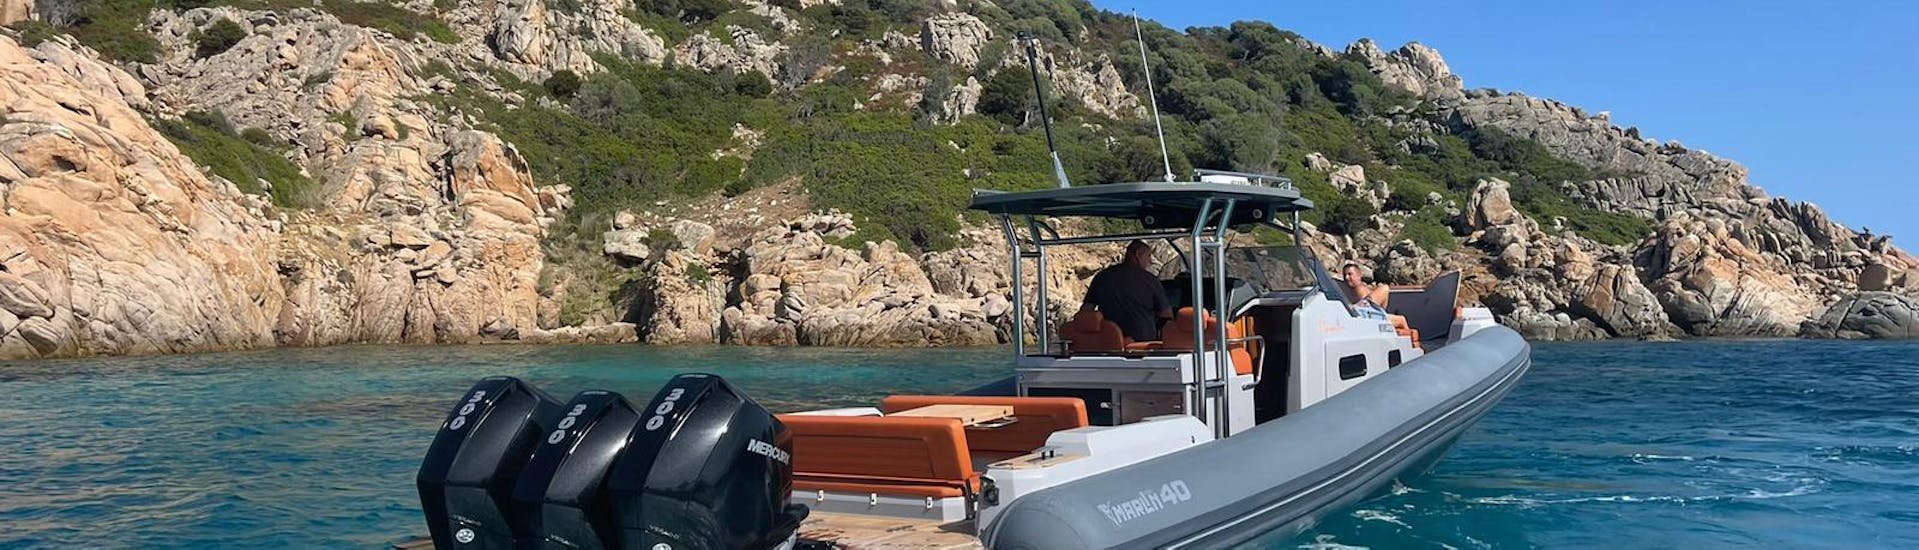 The splendid RIB is headed to the island of Tavolara during one of the boat trips of Controvento Charter Olbia.